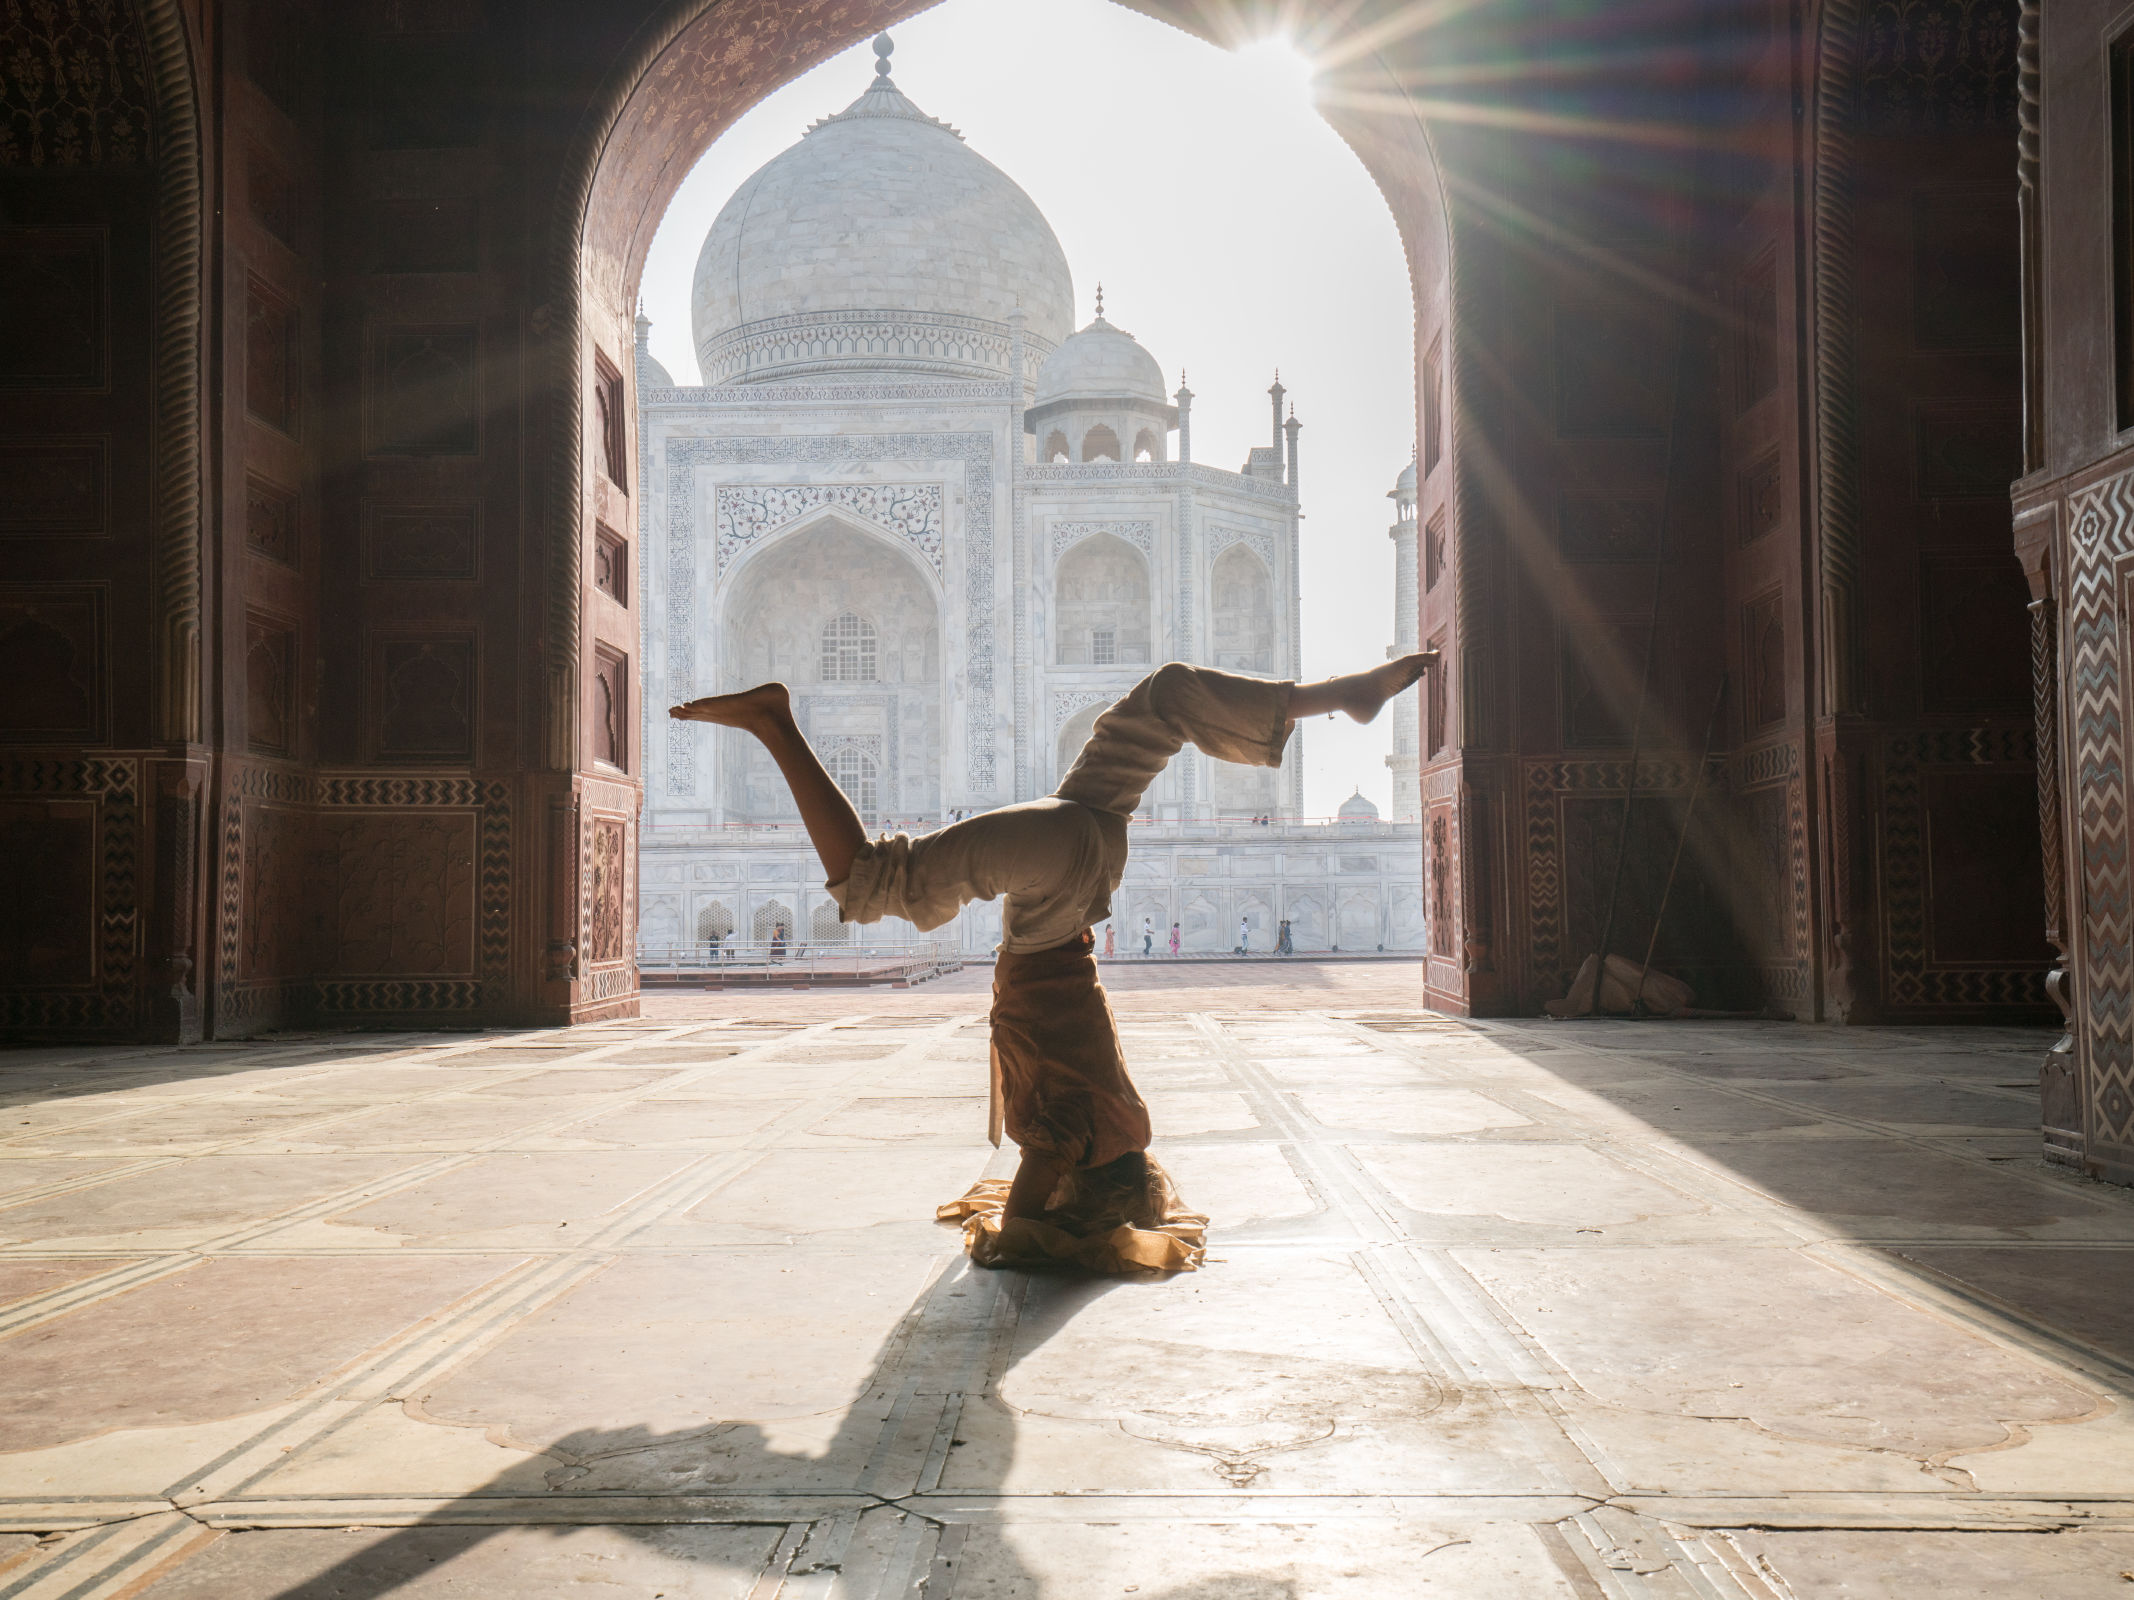 Young woman practicing yoga in India at the famous Taj Mahal at sunrise - Headstand position upside down.